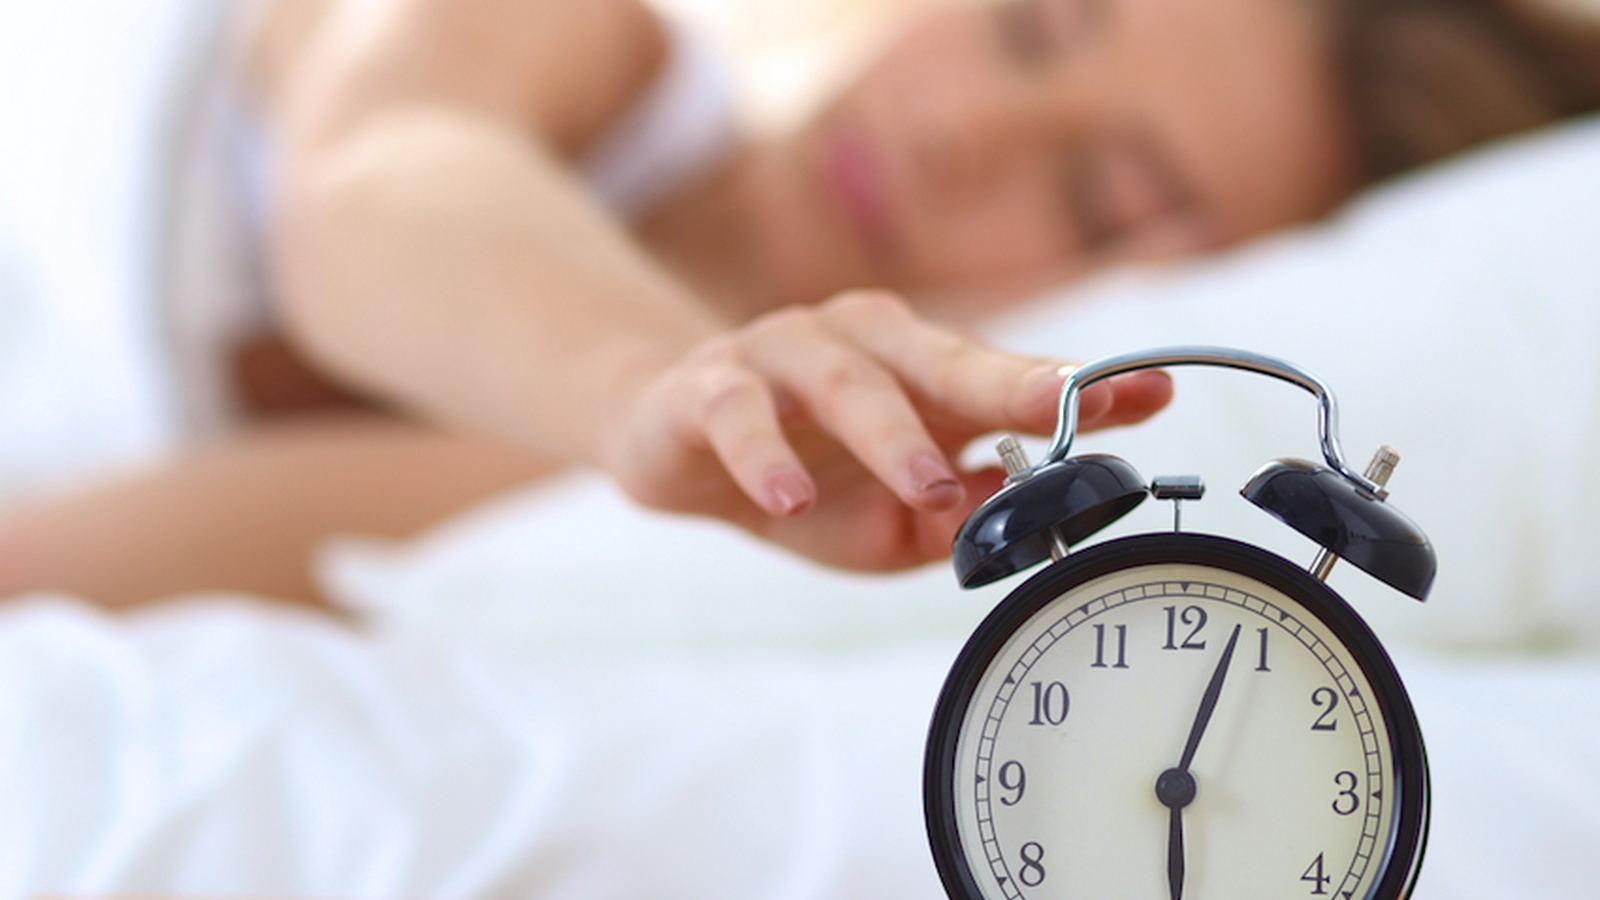 4 Common Signs That You Need More Sleep